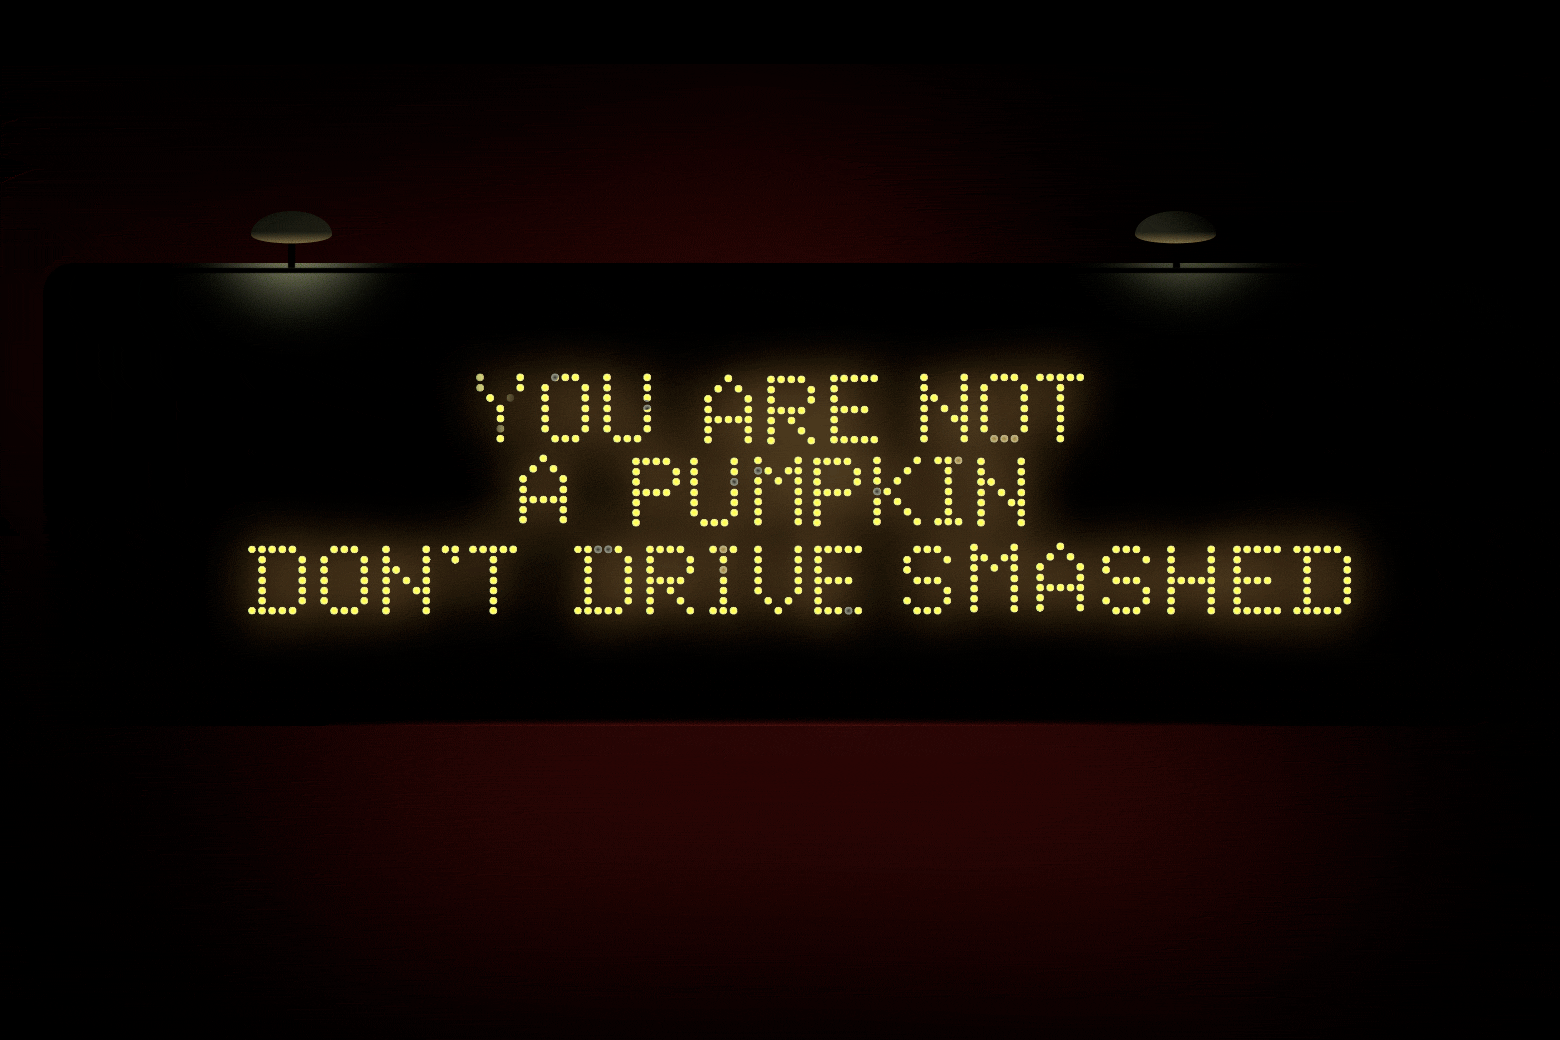 An LED traffic sign flashes through slogans: "You are not a pumpkin don't drive smashed," "This is a sign you should buckle up," "Get your head out of your apps," 